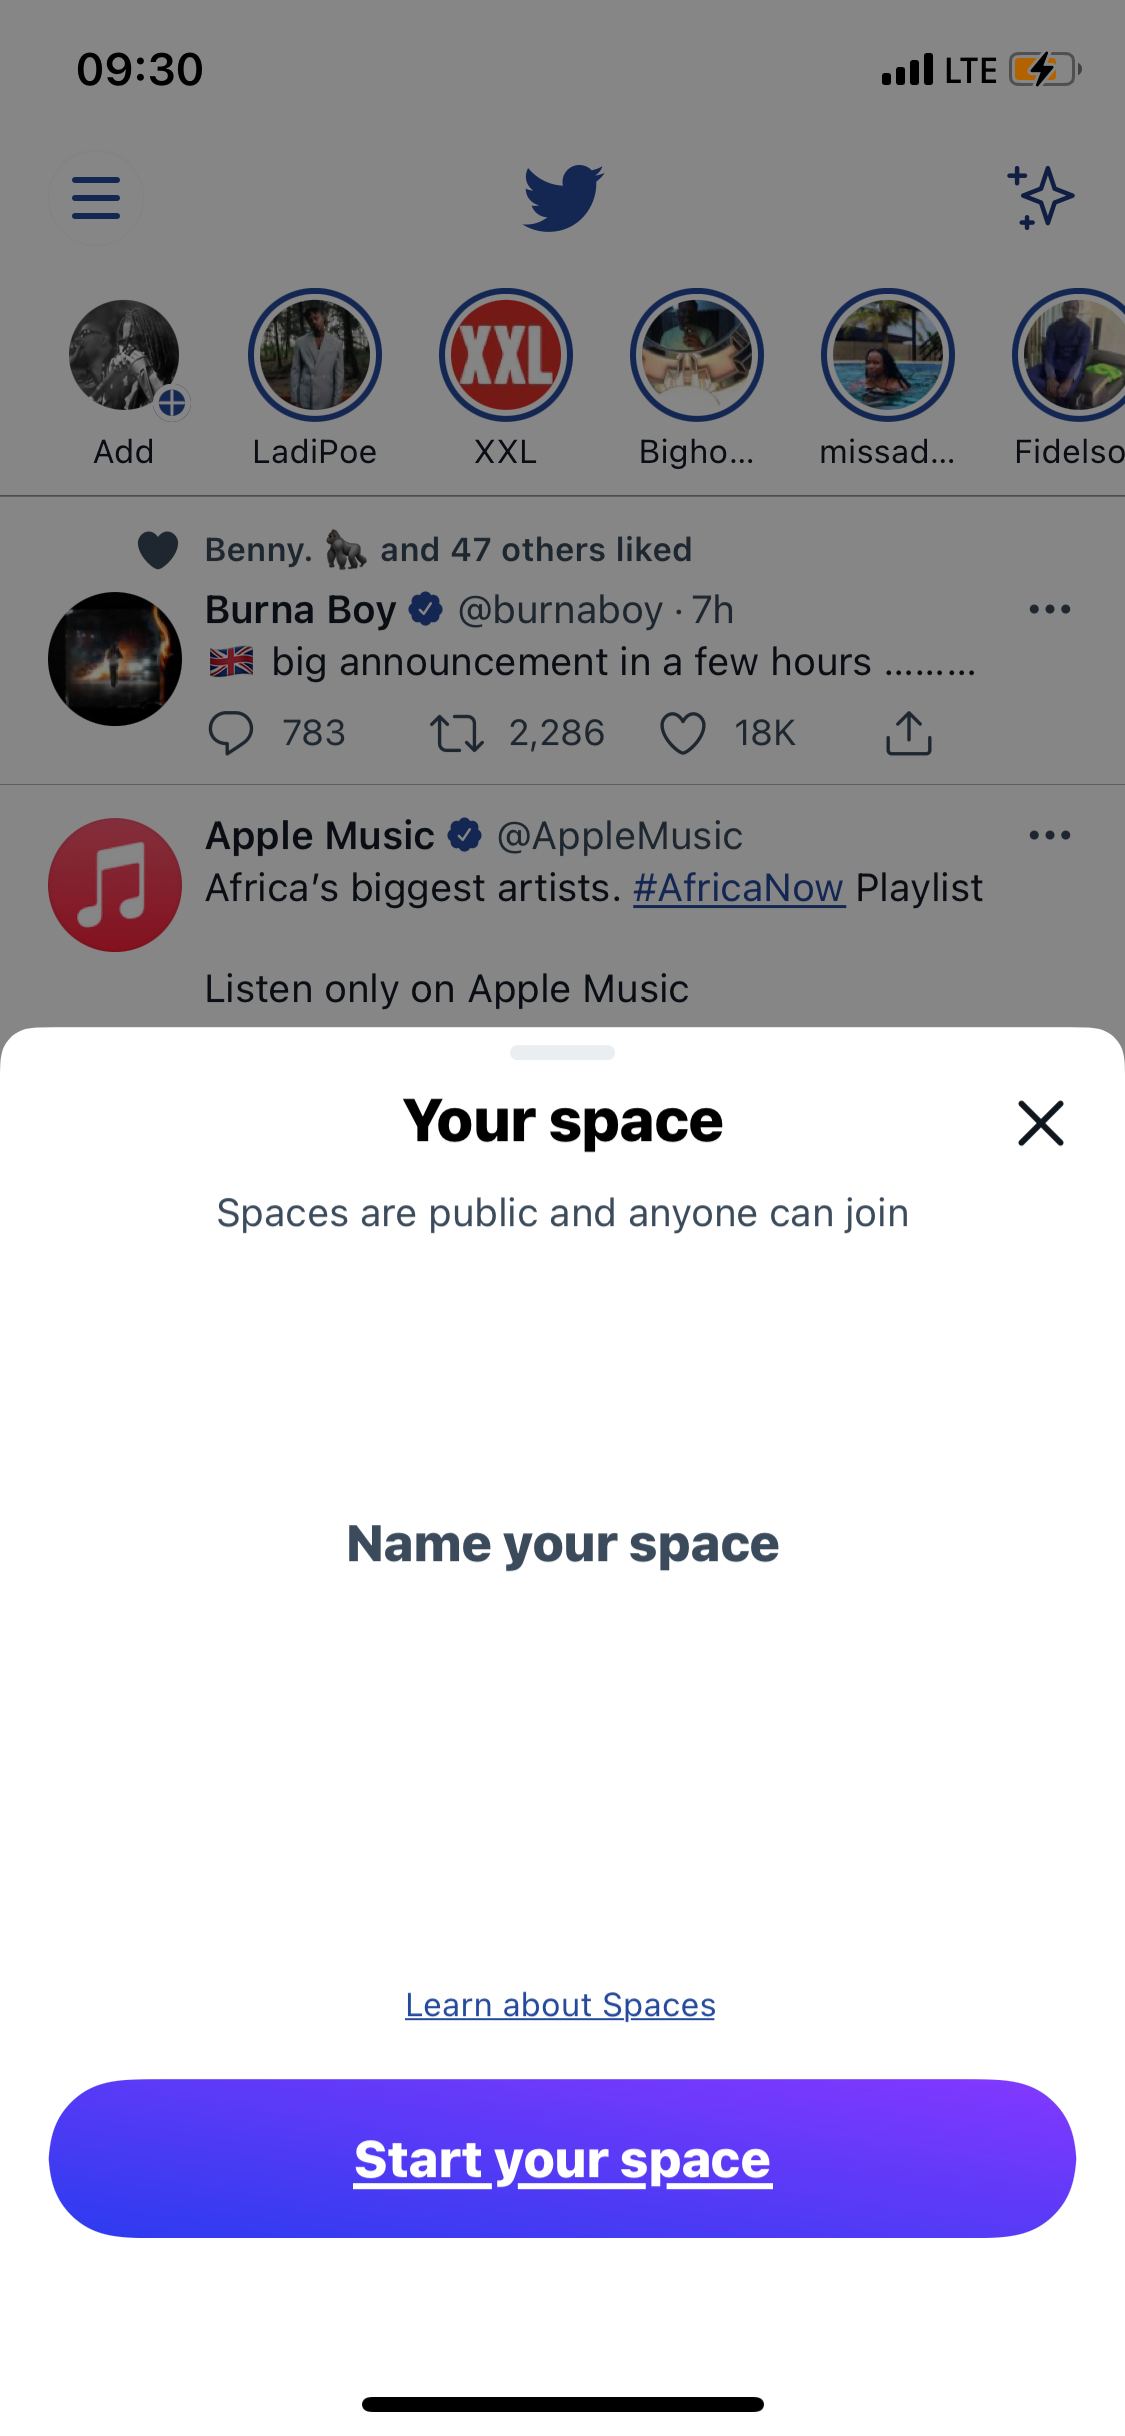 Twitter your space